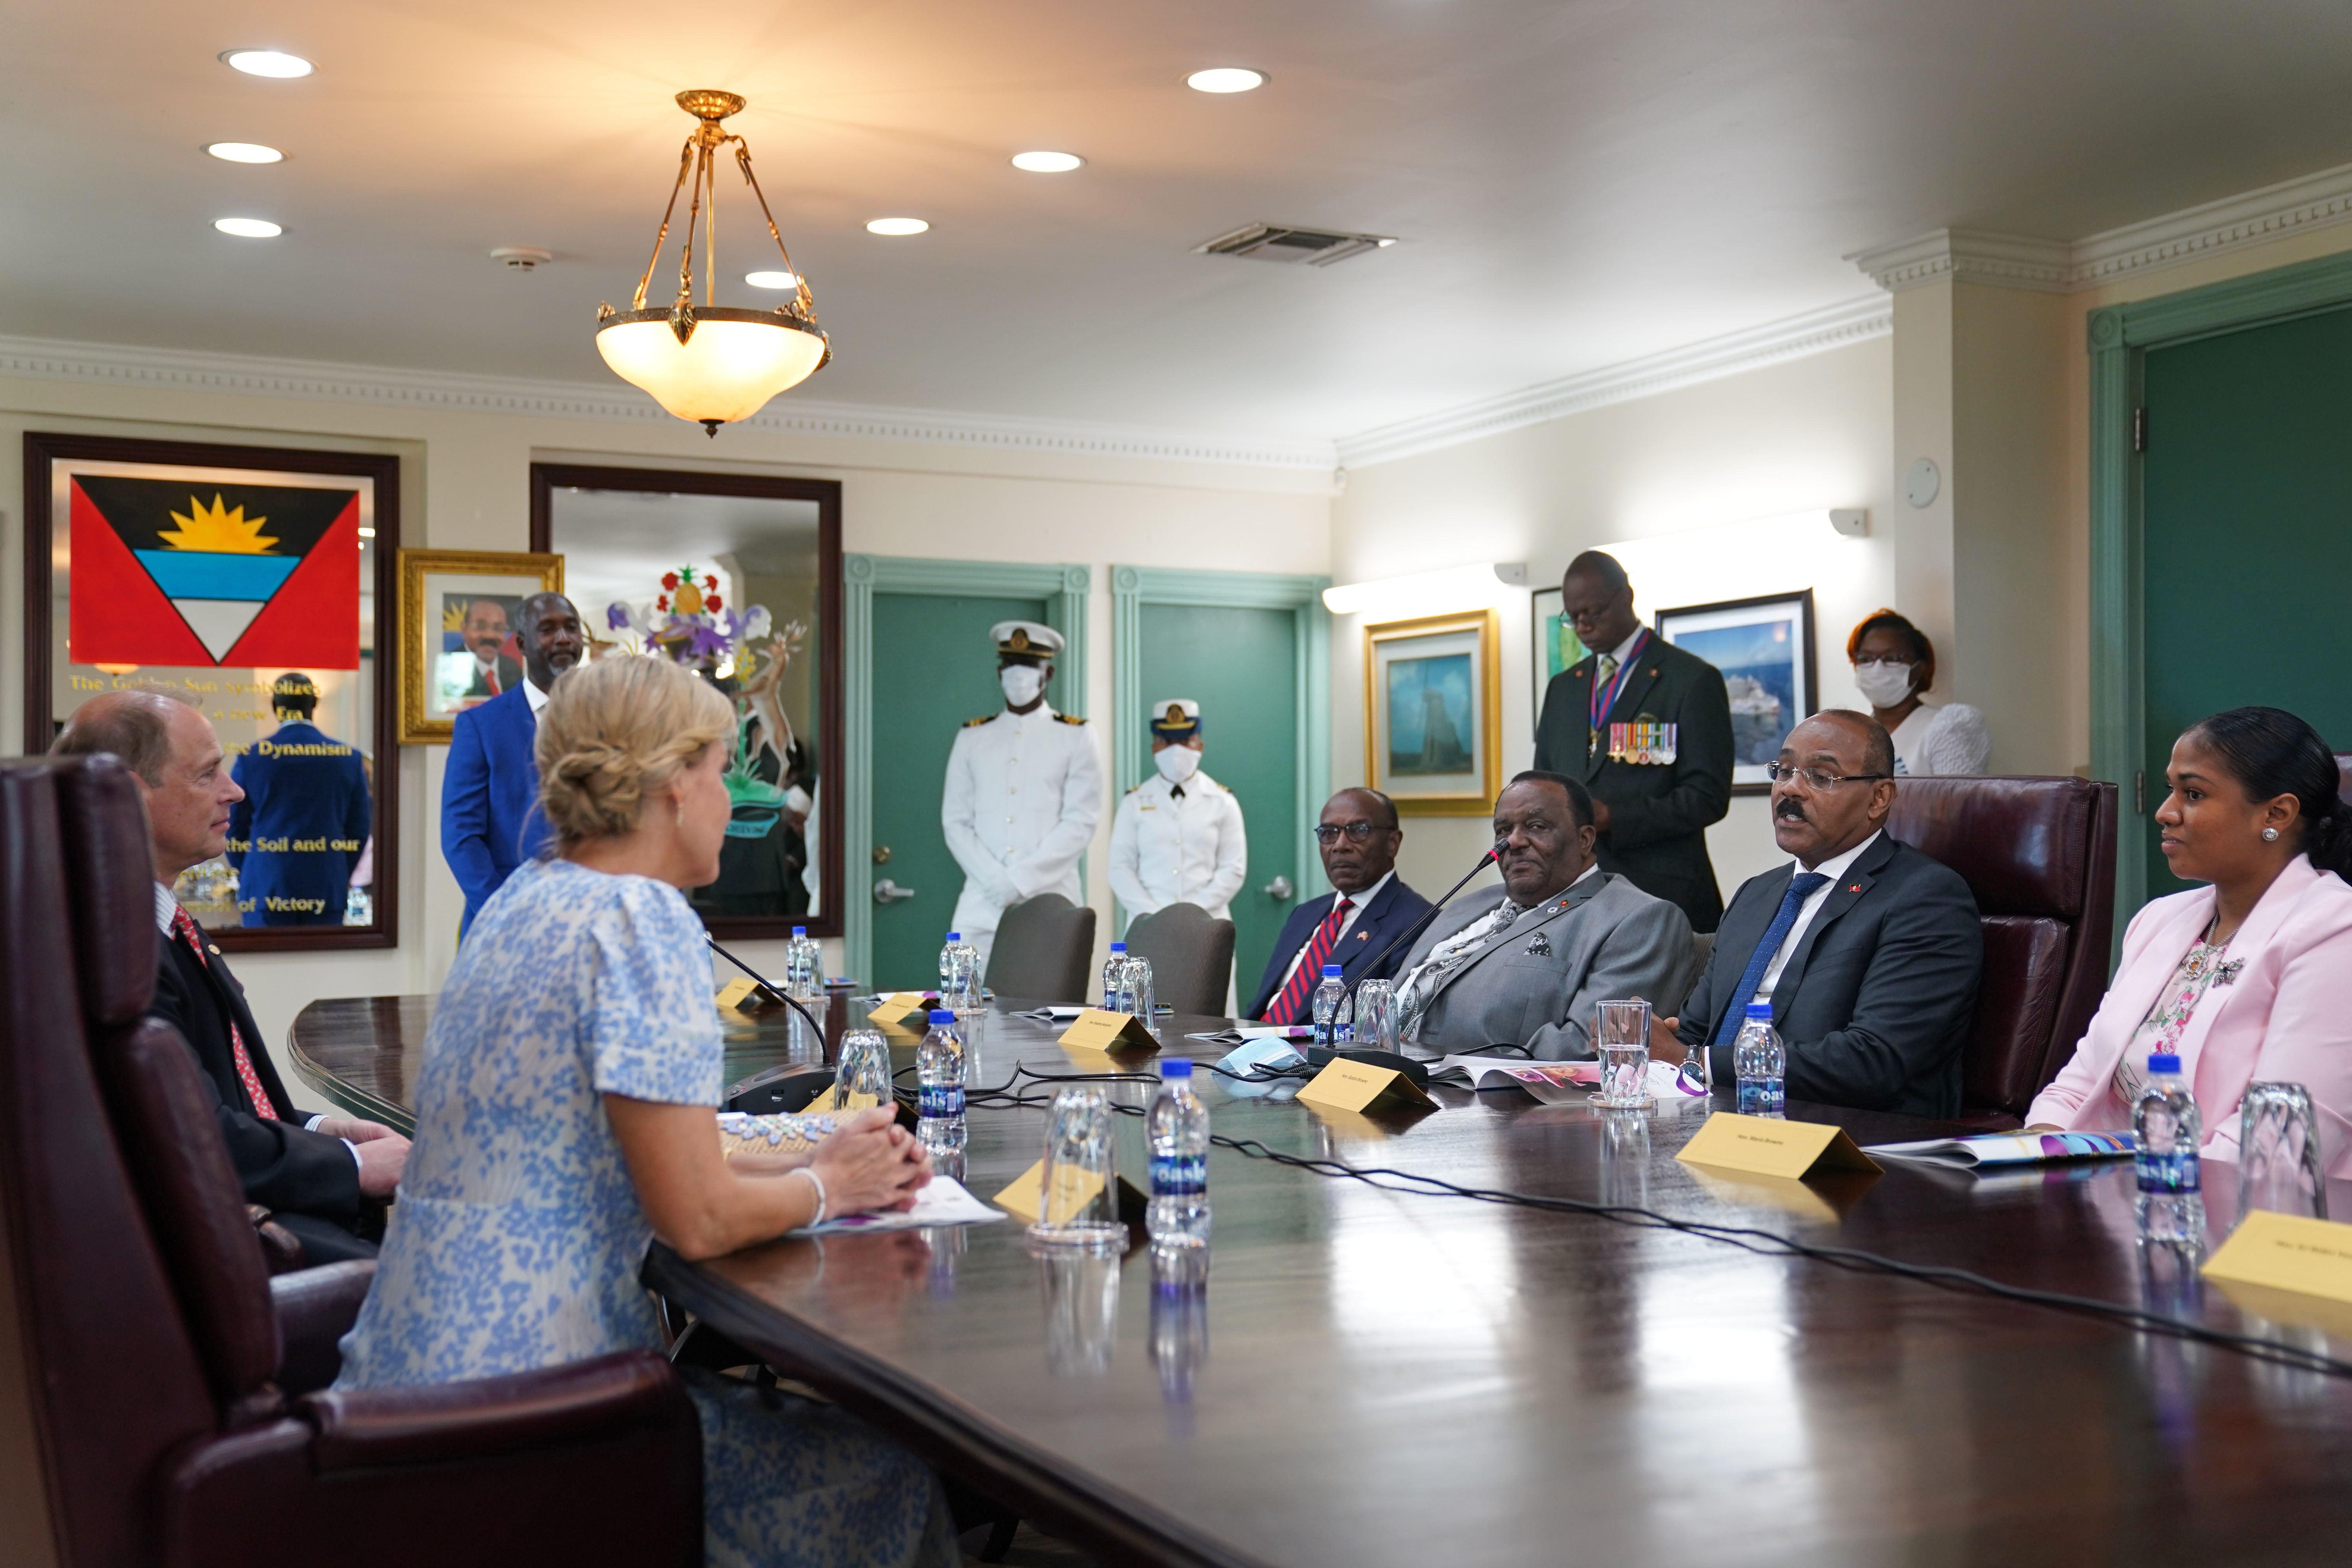 The Earl and the Countess of Wessex meeting Gaston Browne, Prime Minister of Antigua and Barbuda at Government House (Joe Giddens/PA)